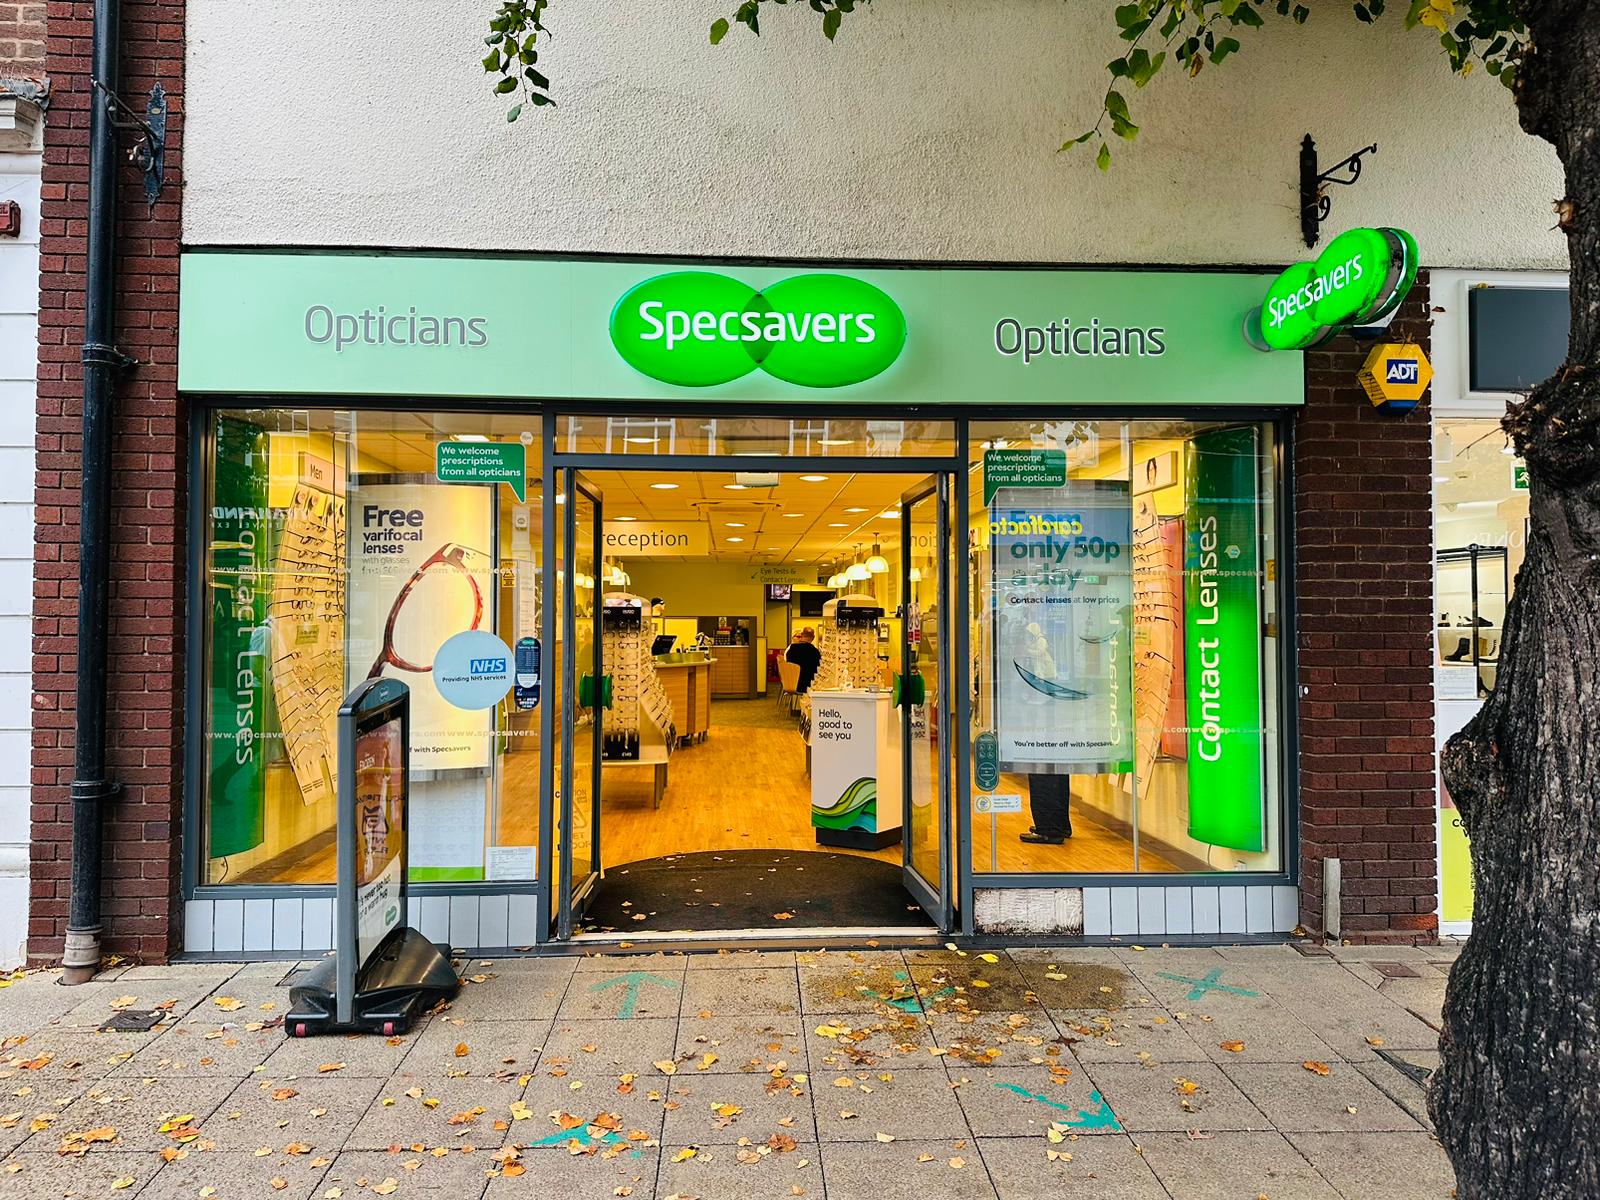 Images Specsavers Opticians - Solihull